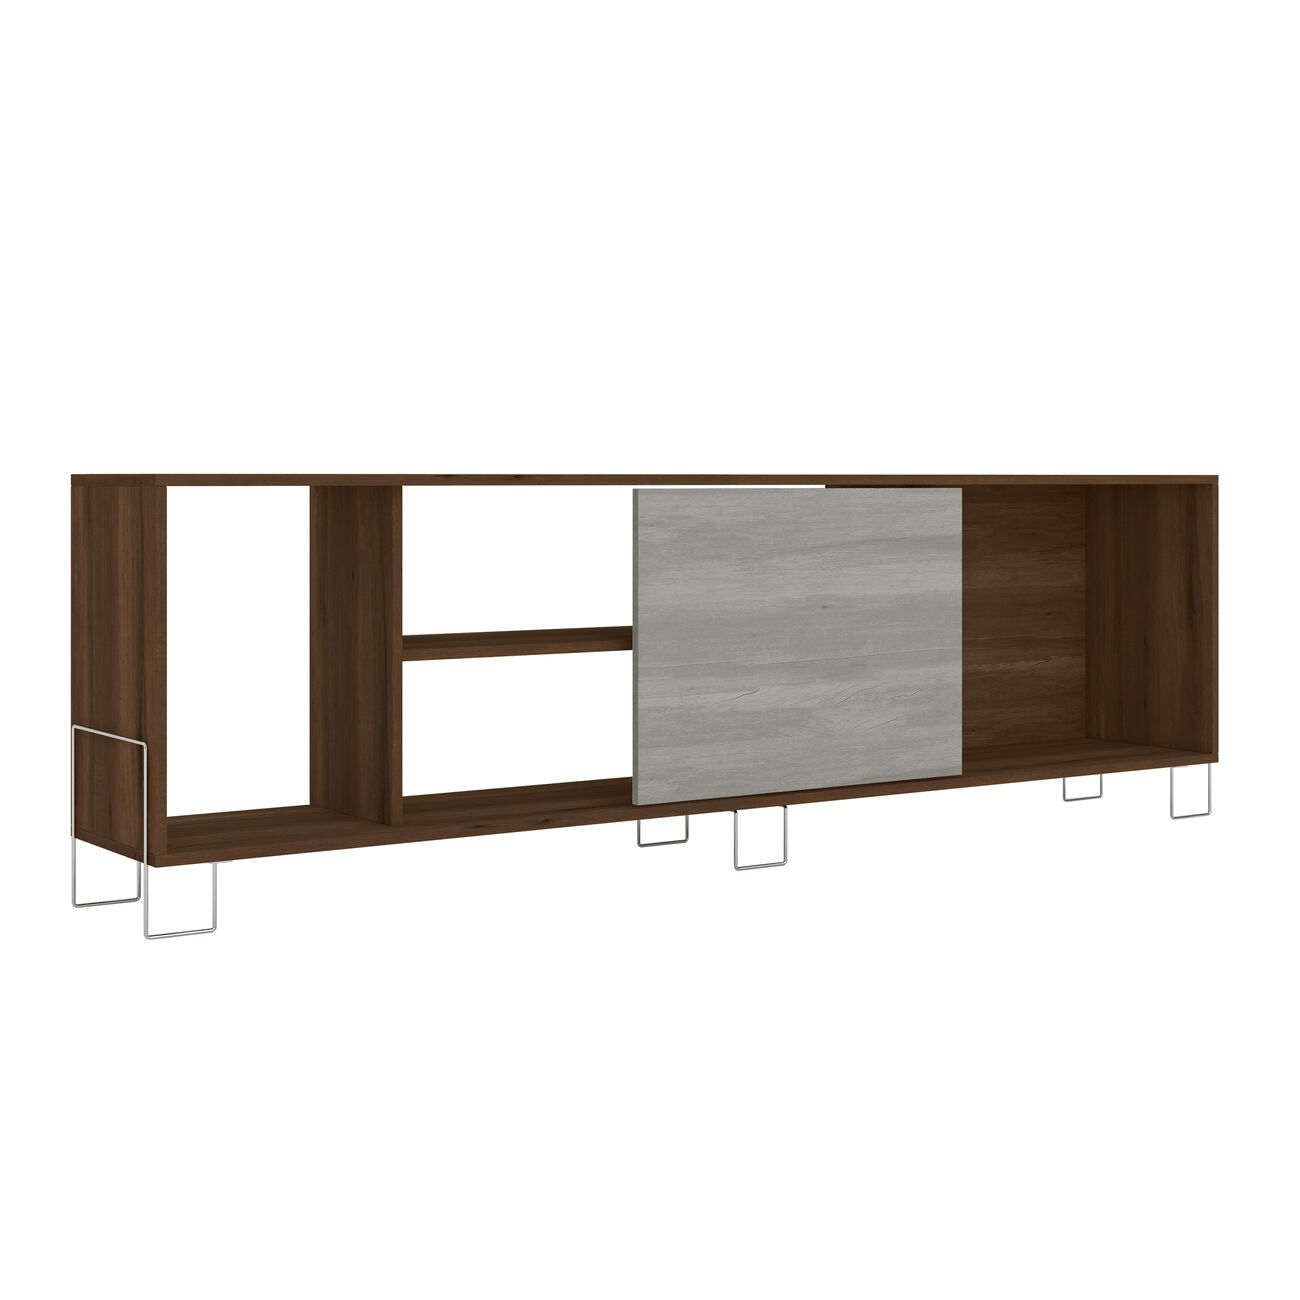 71 Inch Wooden Entertainment TV Stand with 3 Open Compartments, Brown and White